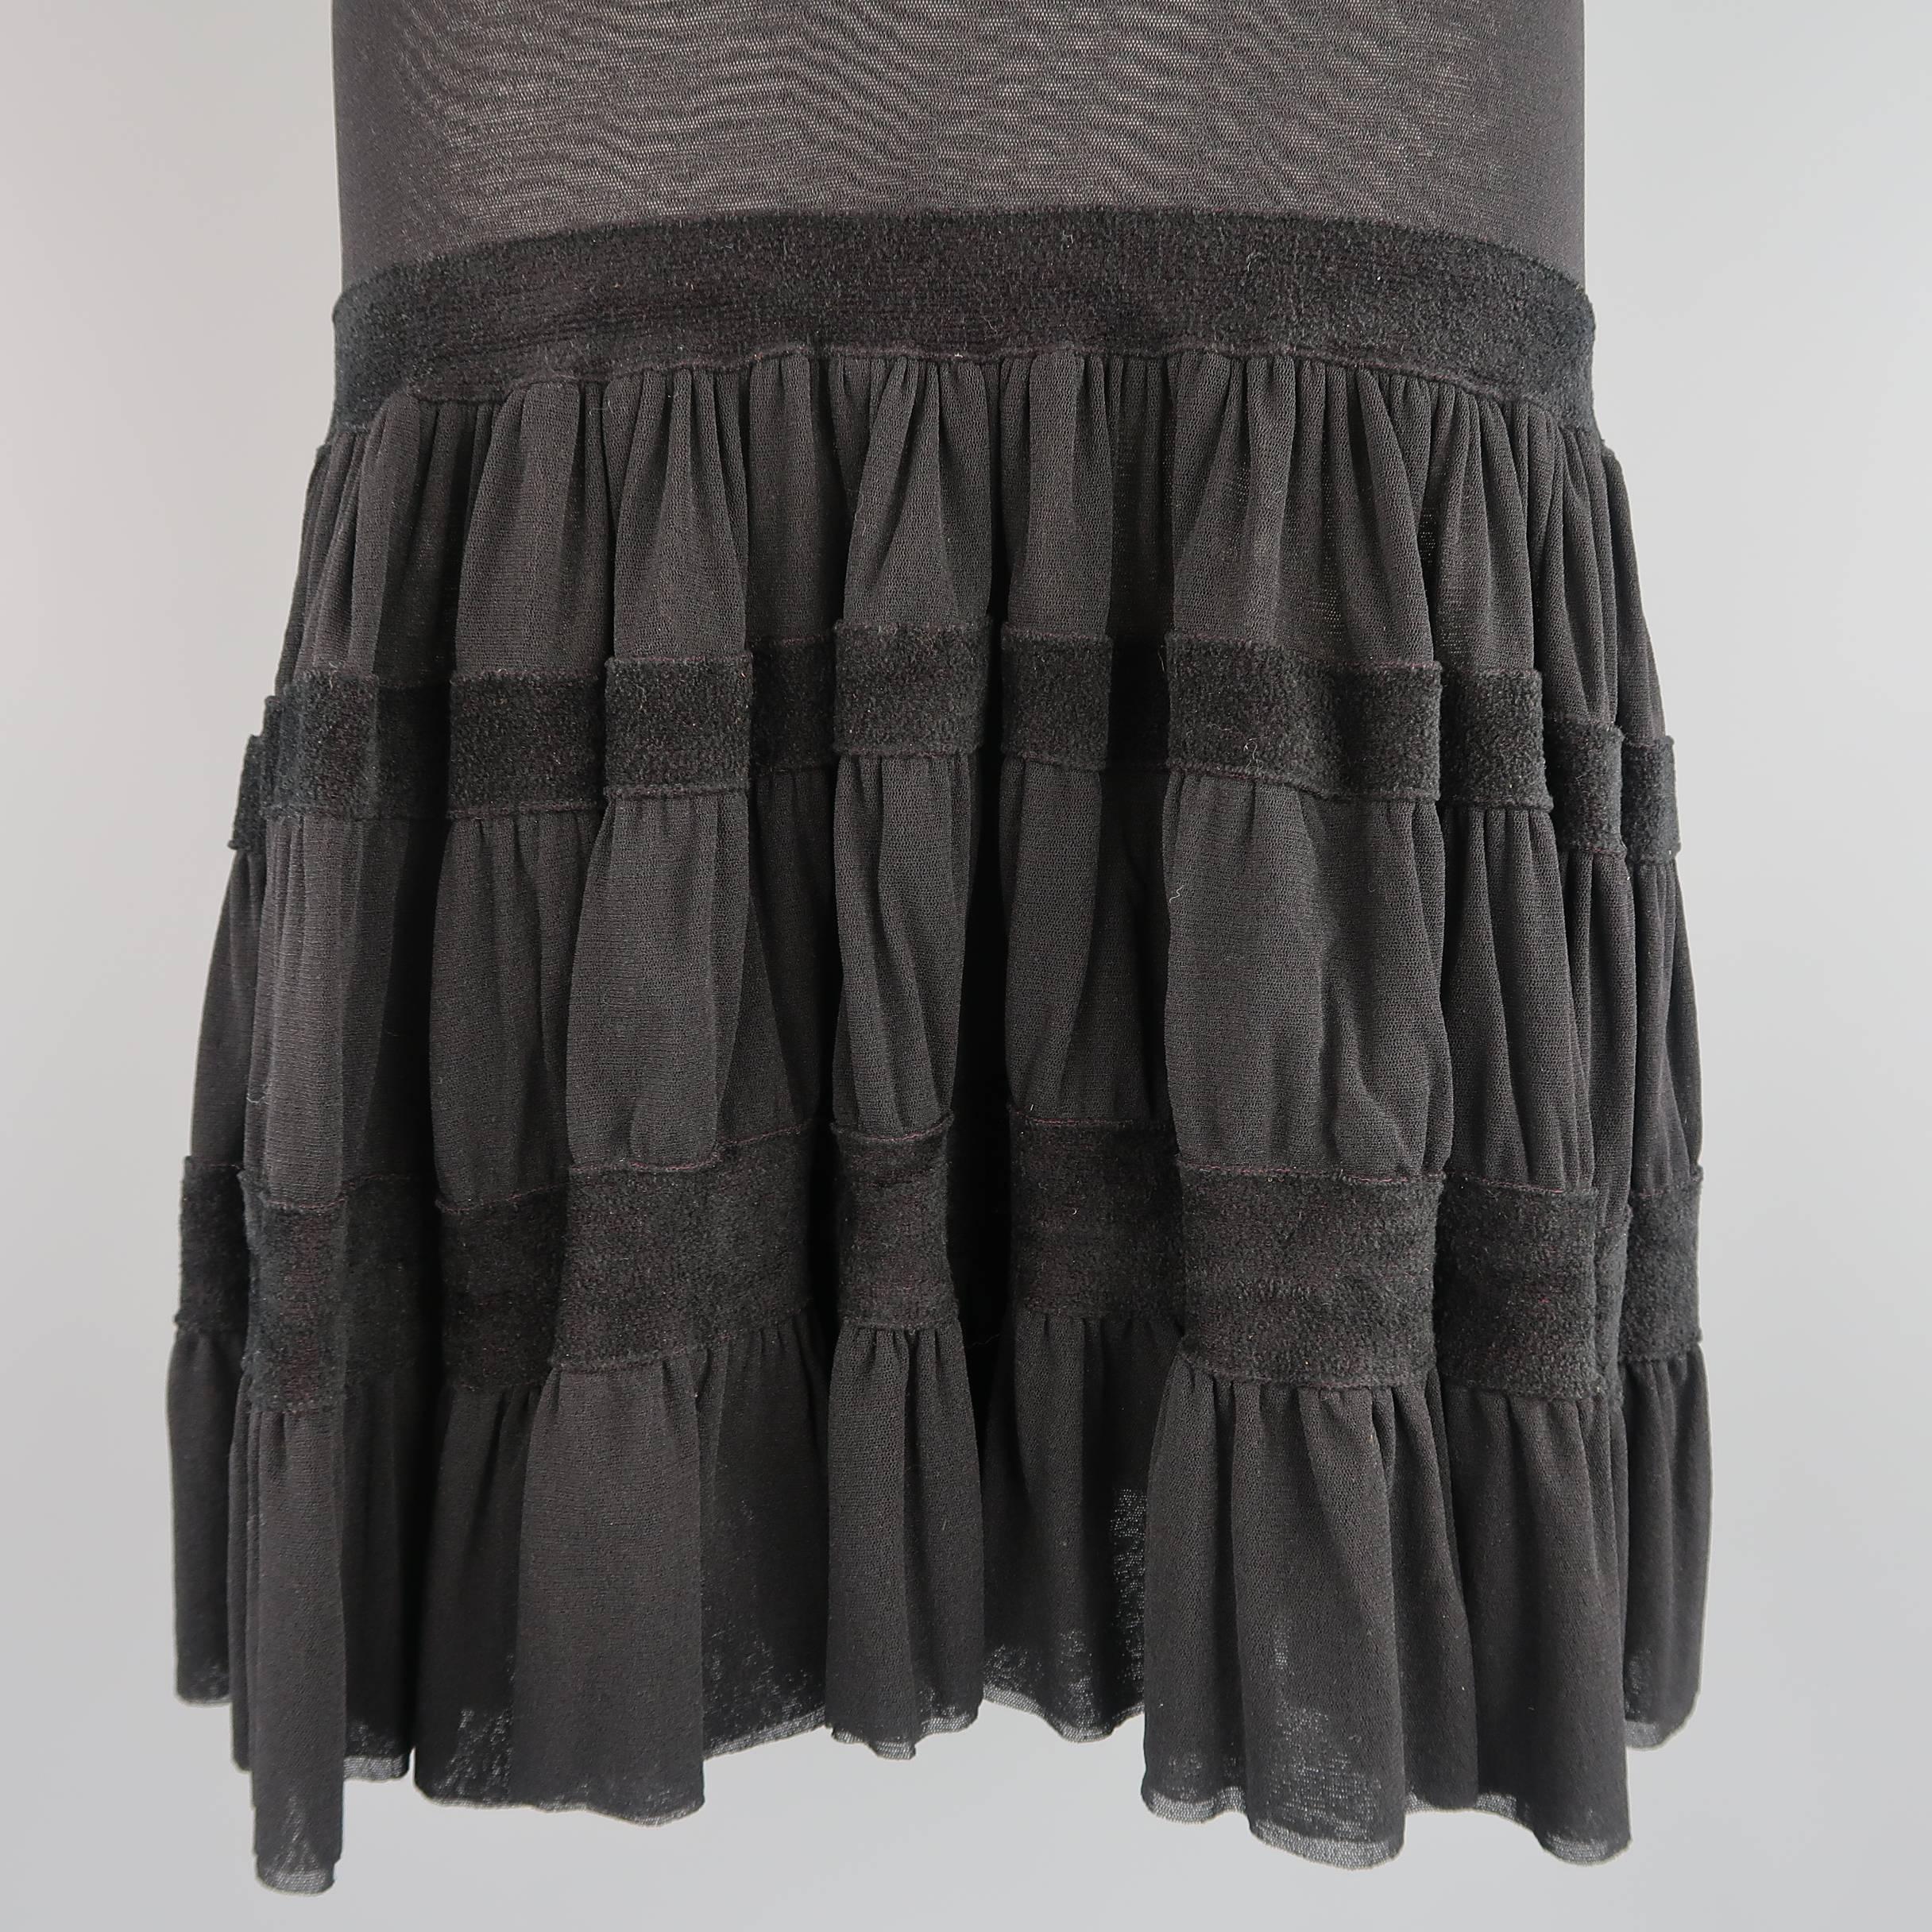 JEAN PAUL GAULTIER skirt comes in stretch micro mesh and features a fitted pencil top, drop waist, ruffle flair skirt, and thick velour trim. Made in Italy.
 
Good Pre-Owned Condition.
Marked: M
 
Measurements:
 
Waist: 28 in.
Hip: 36 in.
Length: 26